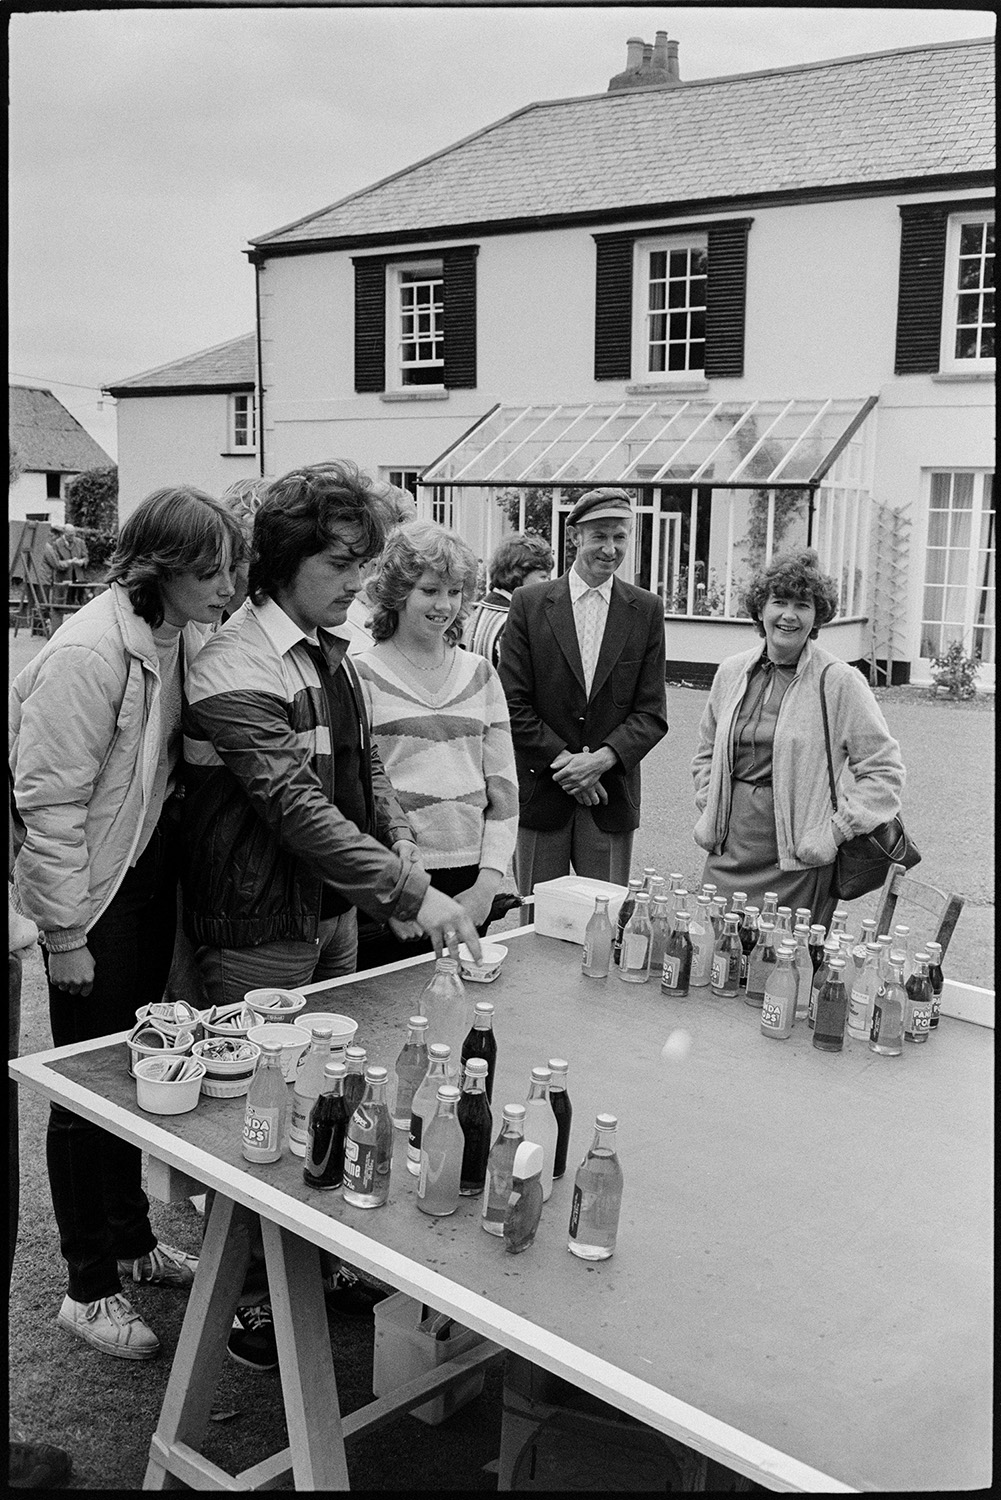 Vicarage fete, stalls, croquet, tea and cakes in rain in garden, dogs. 
[A man trying to win a prize bottle by throwing a ping pong ball into a jar at the vicarage fete at Merton Rectory. Other people are watching him. The vicarage can be seen in the background.]